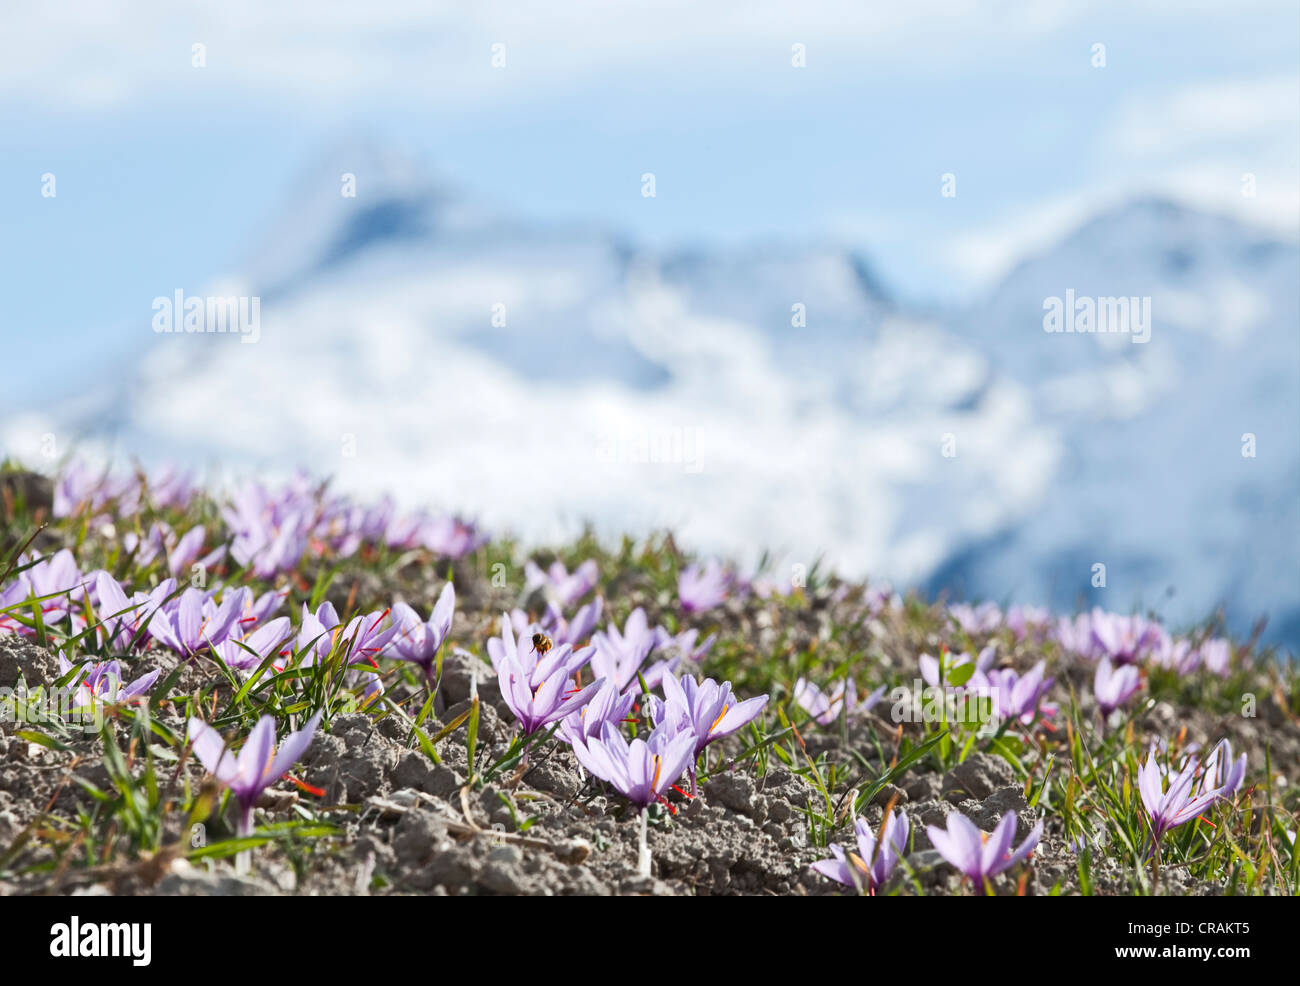 Blooming Saffron Crocus (Crocus sativus) on the small saffron fields of the municipality of Mund in the mountains of the canton Stock Photo